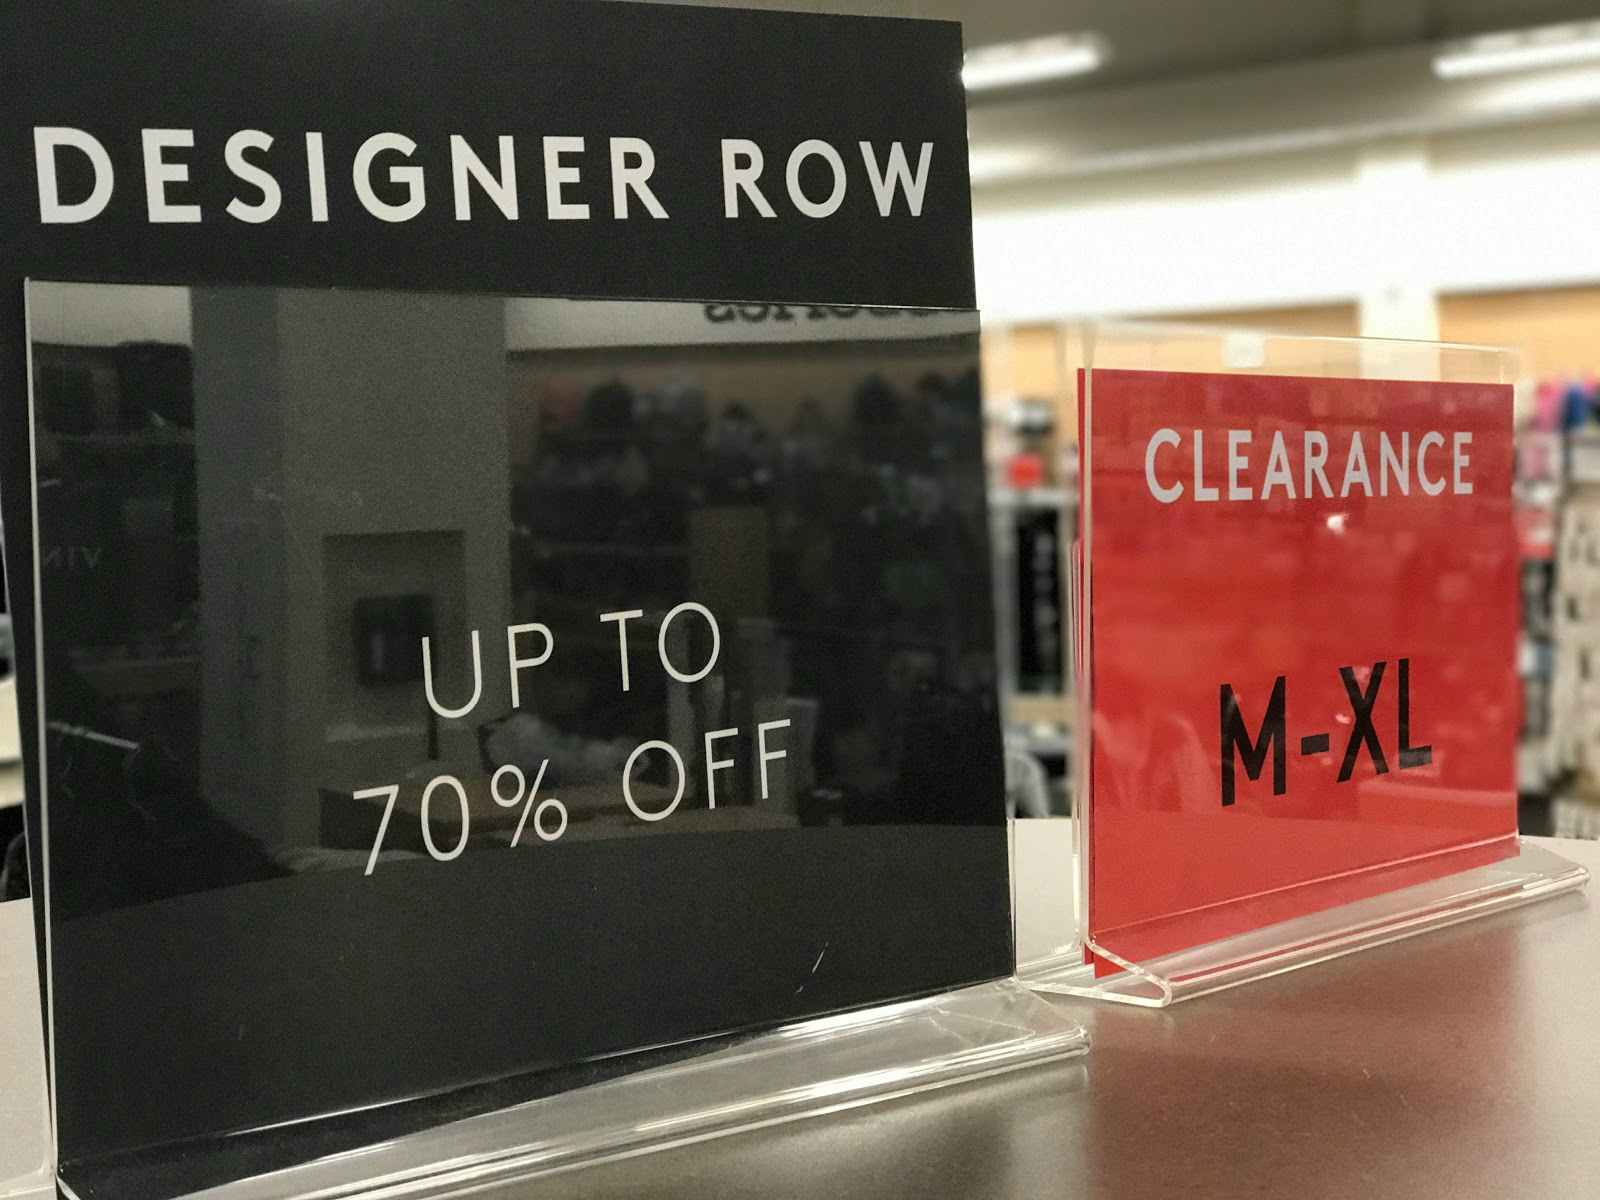 A sign that says "Designer Row" next to a clearance sign on a clothing rack inside Nordstrom Rack.